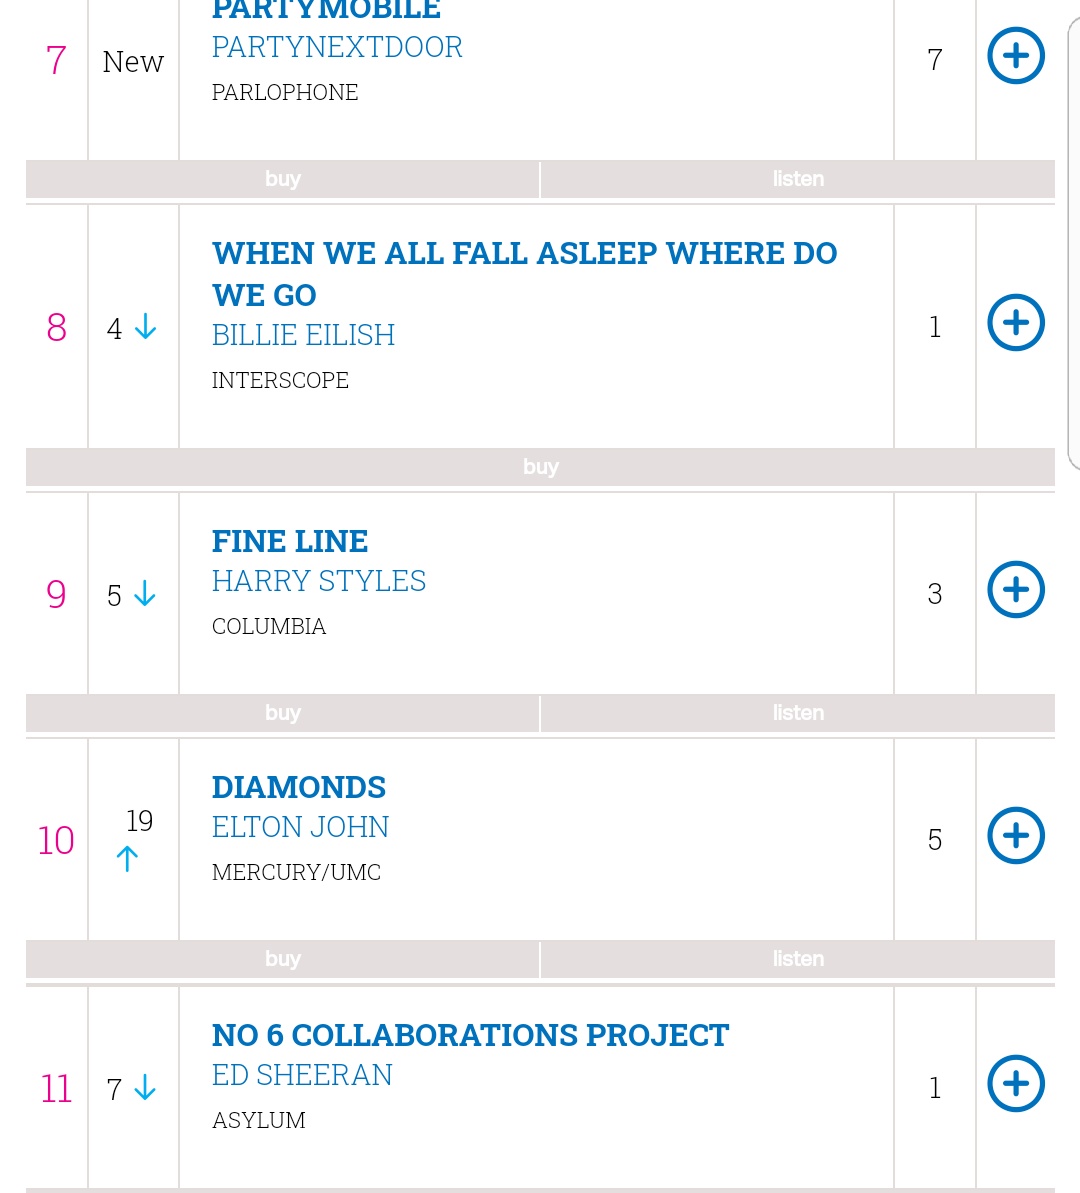 -"Fine Line" spends its 16th week in the top 10 of the UK official chart.-"Adore You" spends 17 weeks in the top 40 of the UK official chart (#16 this week). Harry has two songs on the chart with "Falling" at #20.